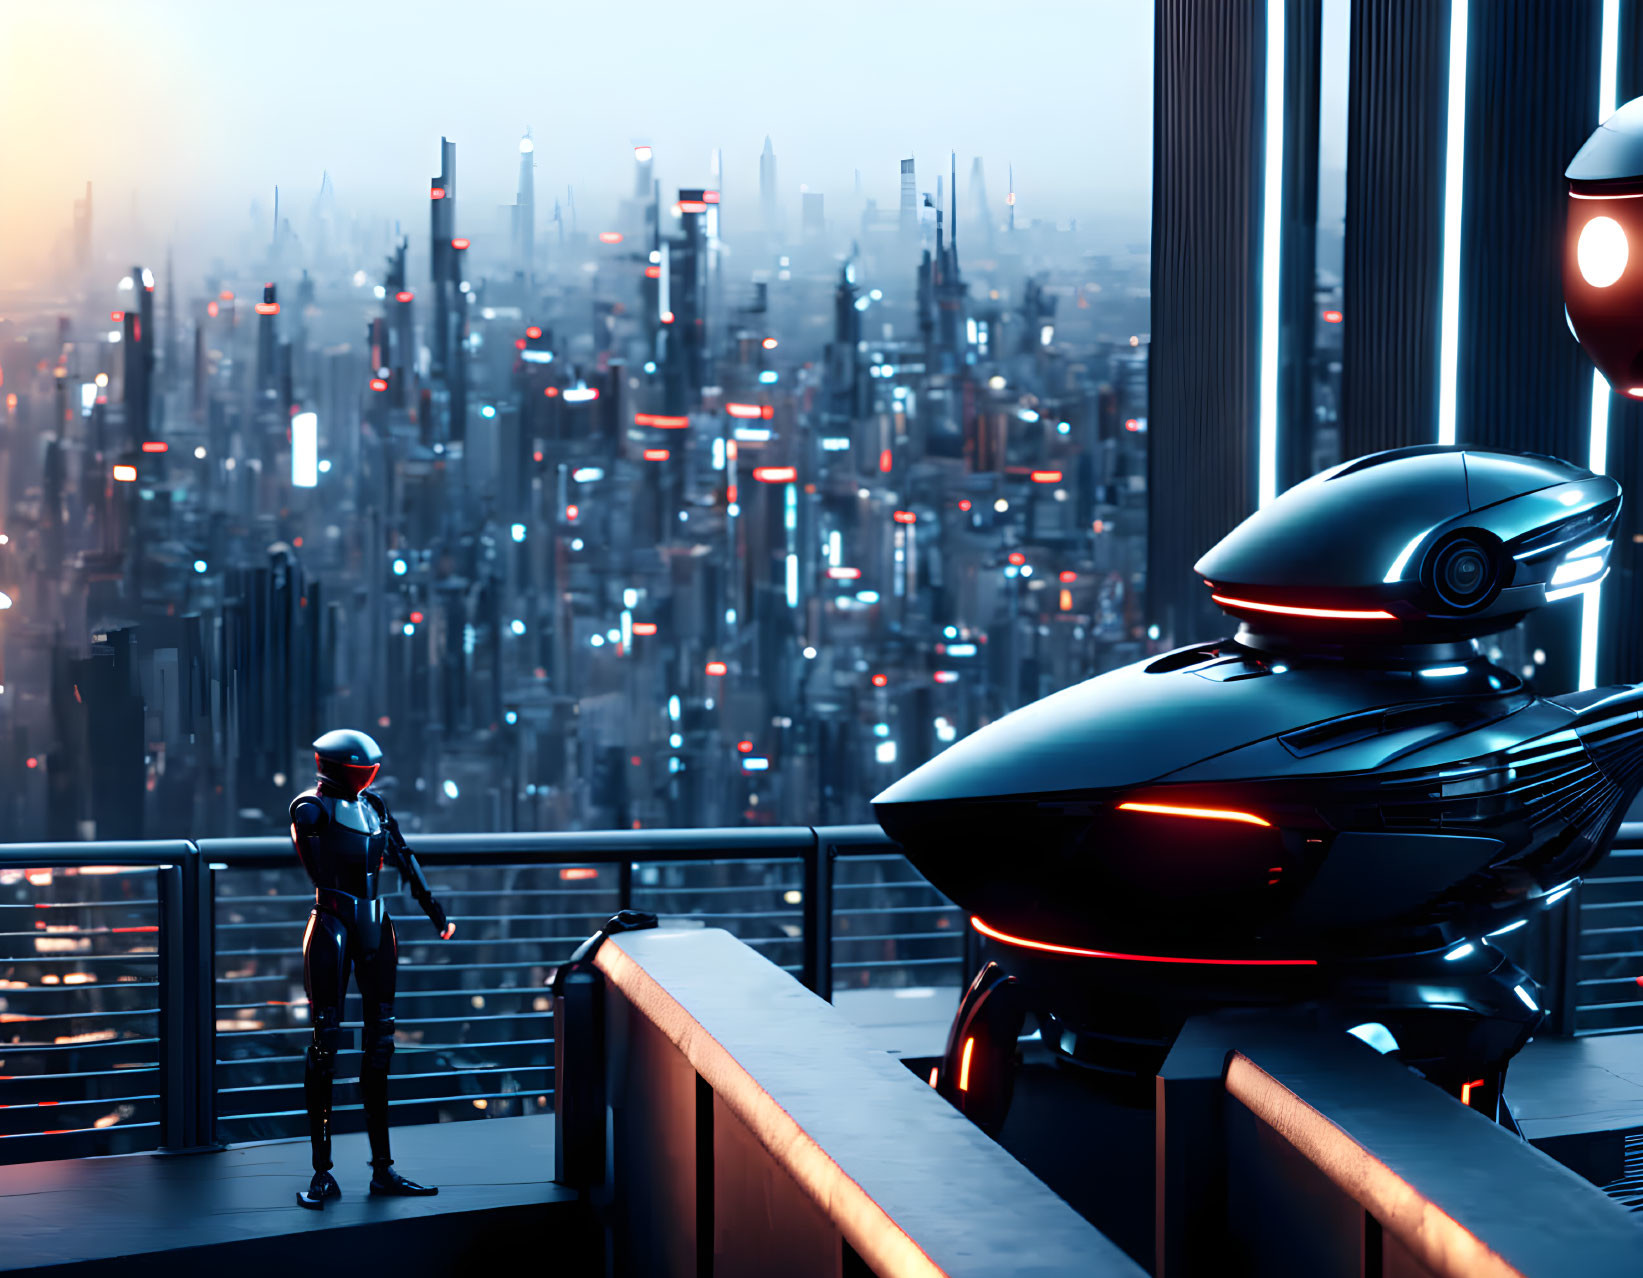 Futuristic suit person with robot on balcony overlooking cityscape at dusk